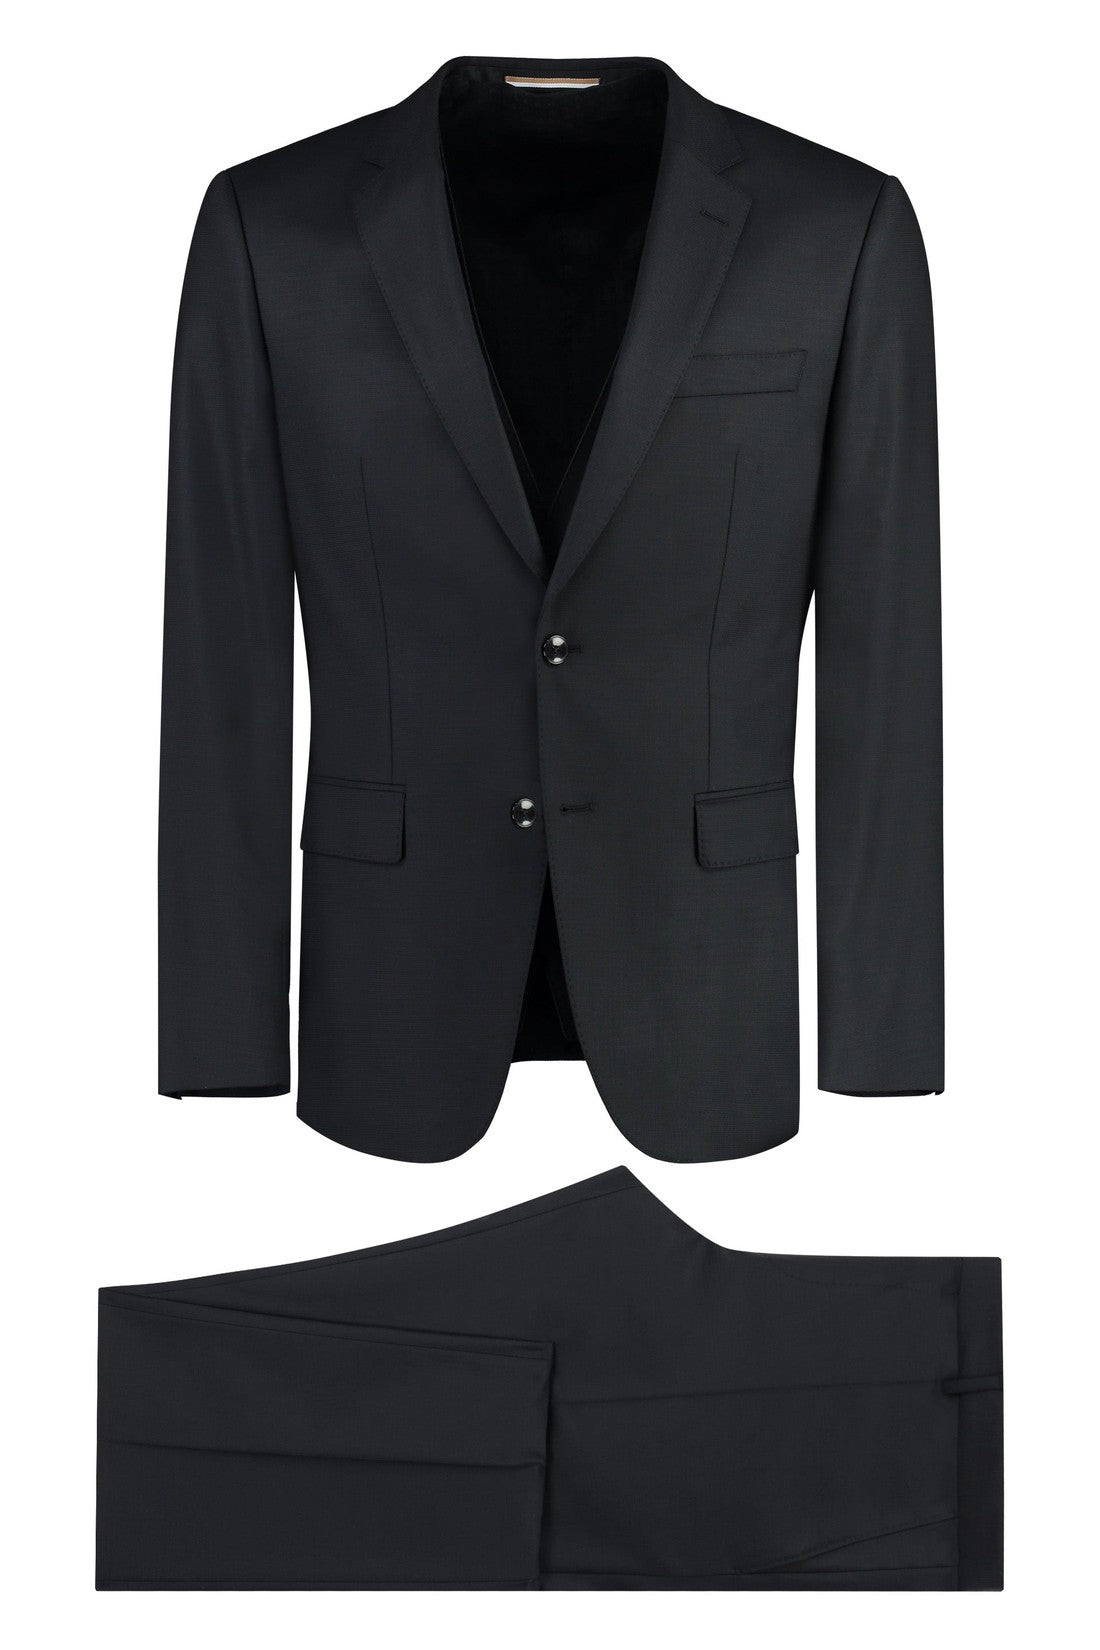 BOSS-OUTLET-SALE-Stretch wool Three-pieces suit-ARCHIVIST